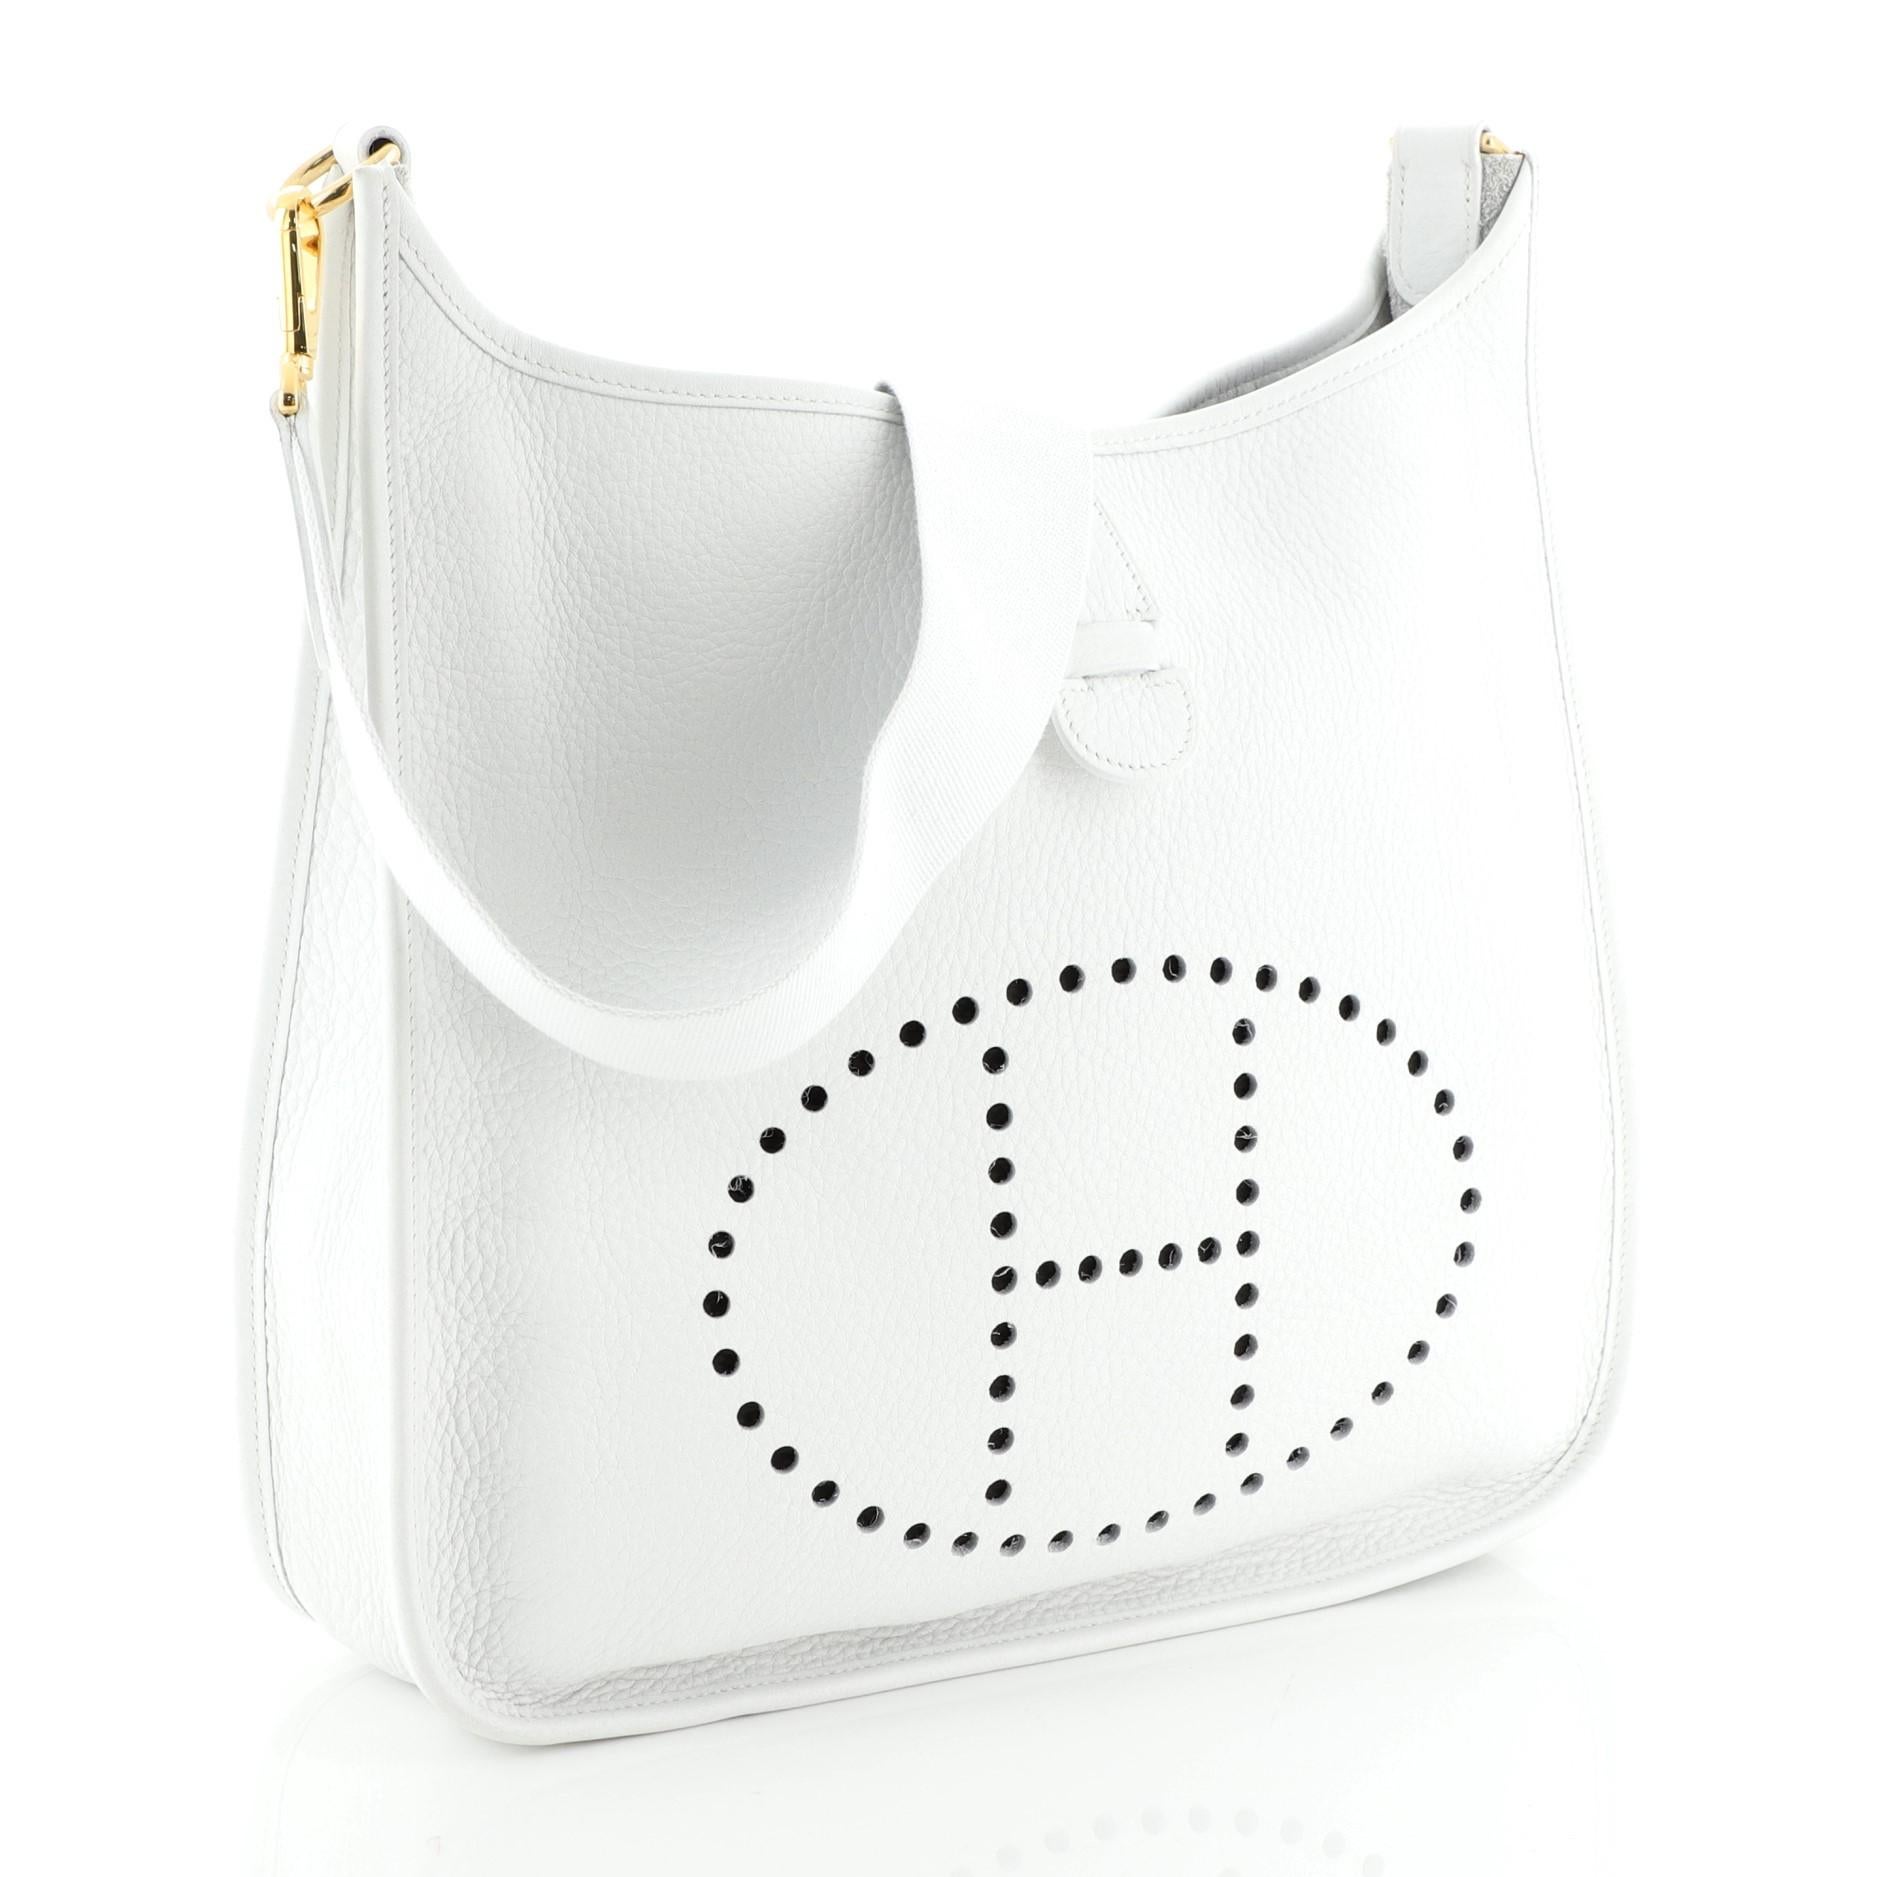 This Hermes Evelyne Crossbody Gen I Clemence GM, crafted in Blanc white Clemence leather, features perforated H design at the front, textile shoulder strap, and gold hardware. It opens to a gray raw leather interior. Date stamp reads: F Square